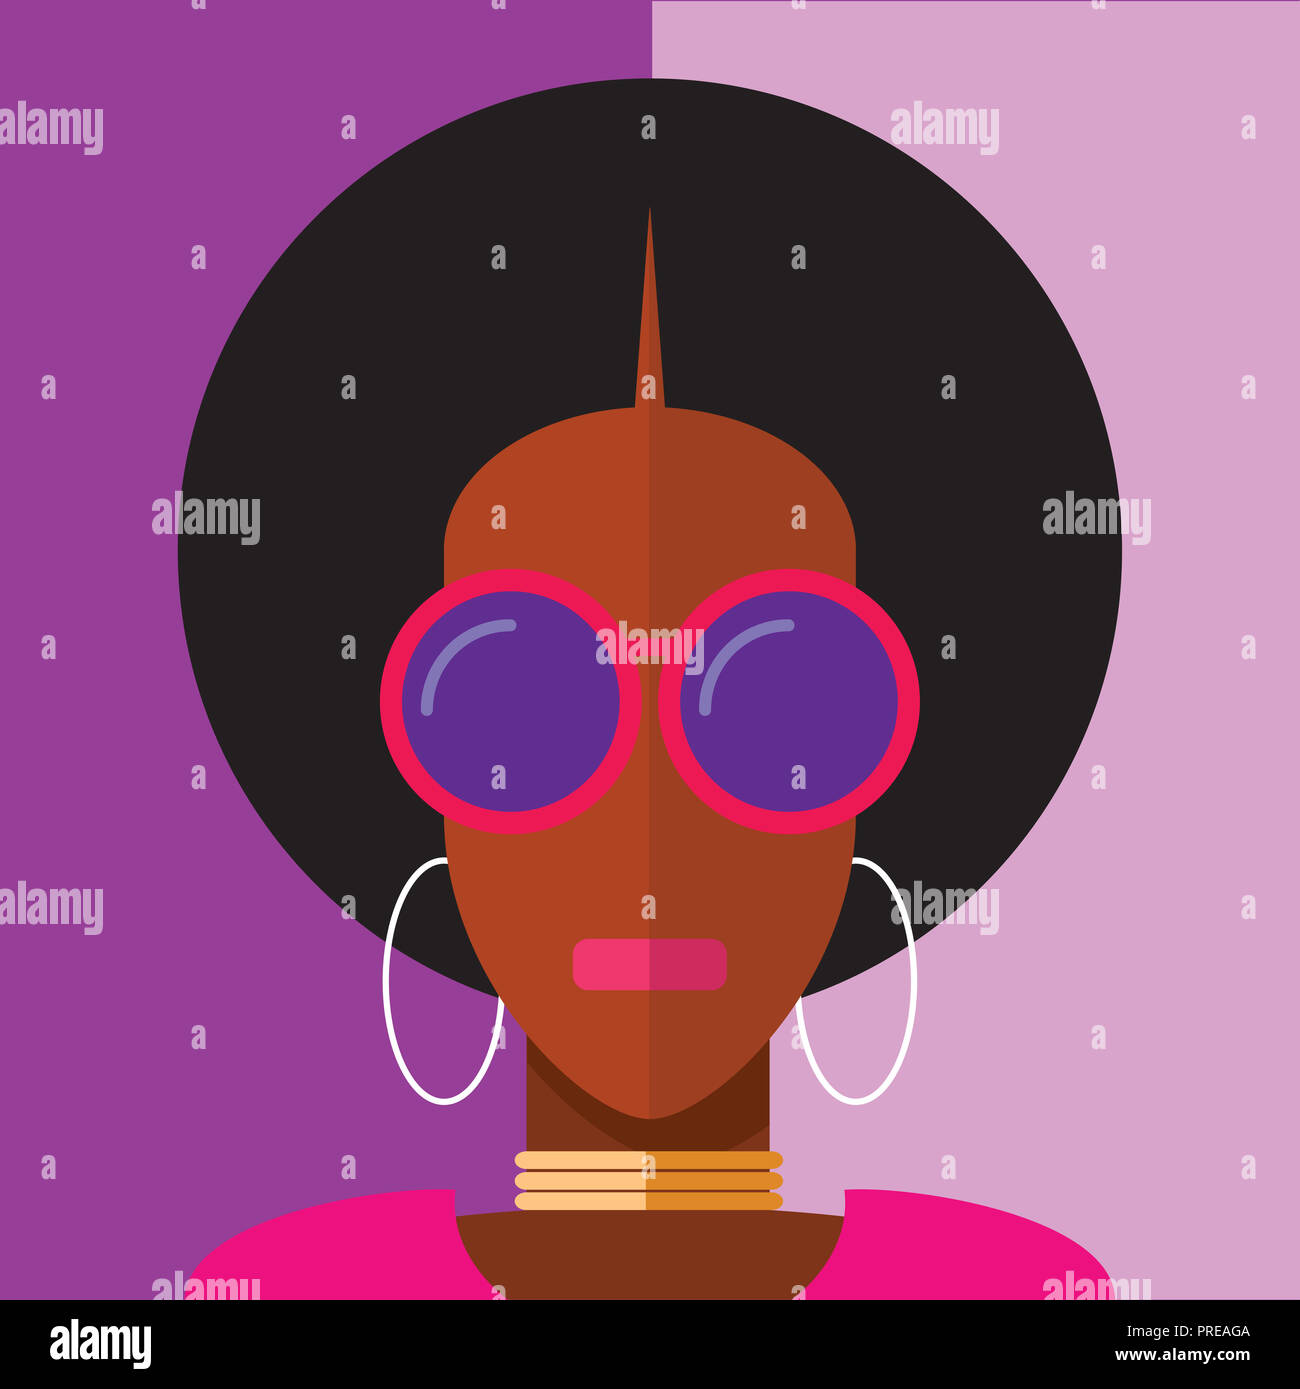 Portrait of fashionable woman with afro hair, sunglasses and hoop earrings Stock Photo